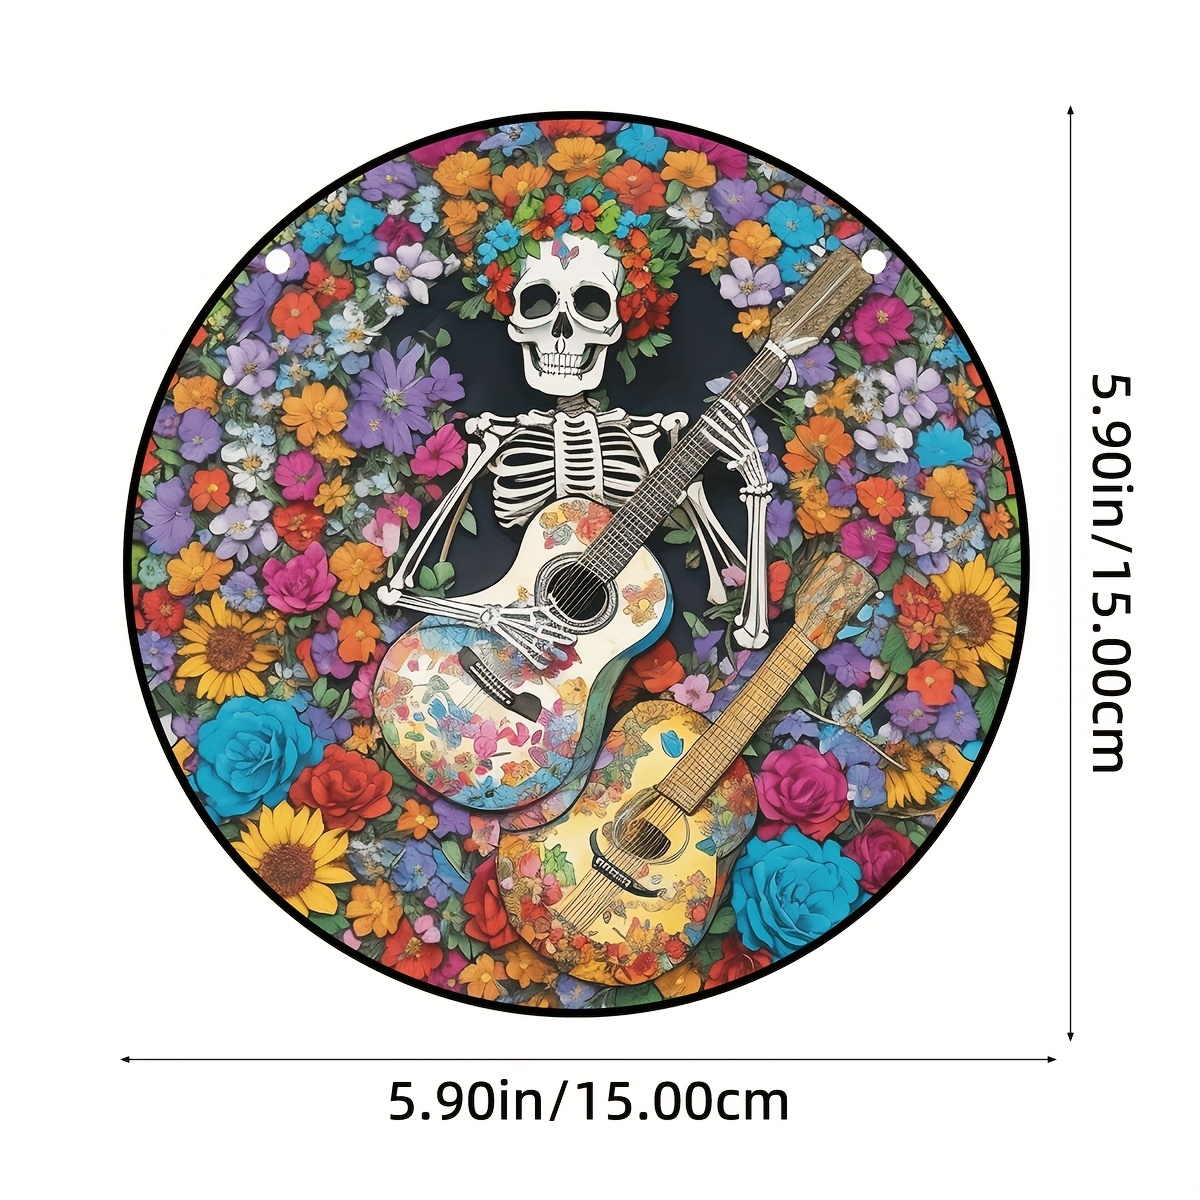 1pc stained skull artwork suncatcher window hanging easy to hang halloween for gift home deco unique wall decorations festival or workmates a gift details 2